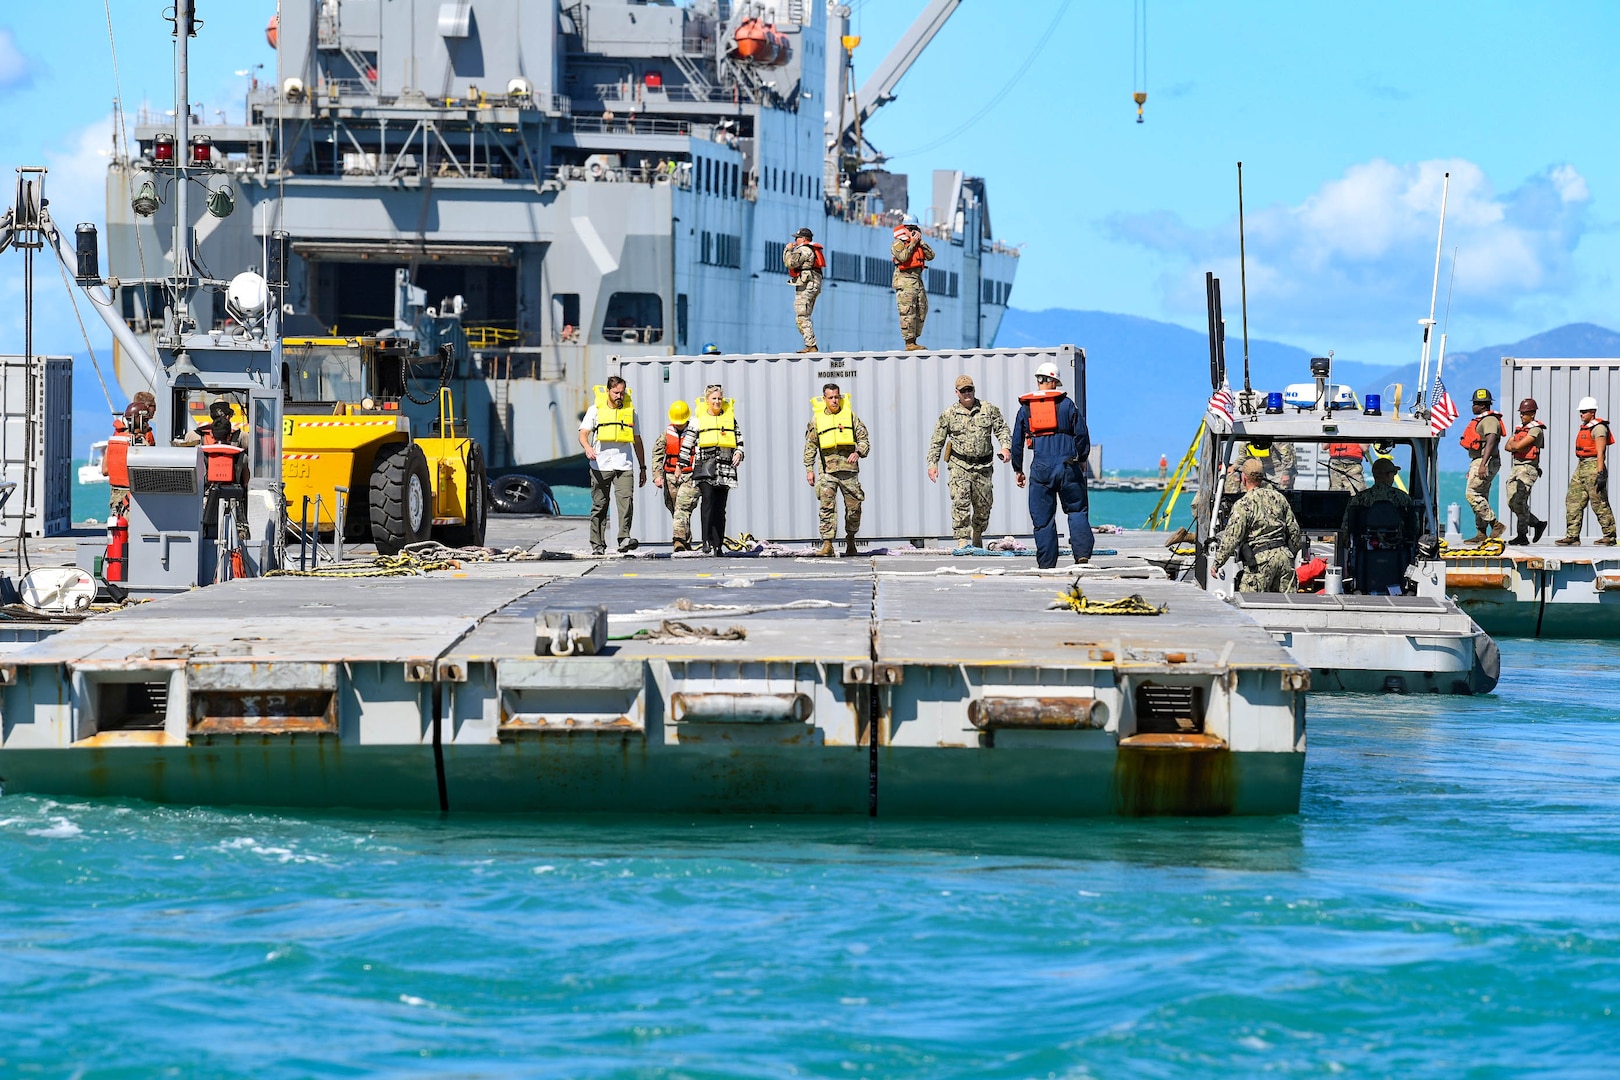 Army mariners and senior leaders stand aboard the roll on/roll off discharge facility as part of a Joint Logistics Over-the-Shore overview and brief during Talisman Sabre 2023 in Bowen, Australia, July 29, 2023. JLOTS demonstrates the critical capability of bringing vehicles and equipment to the shore in austere environments or when port facilities are unavailable. Talisman Sabre is the largest bilateral military exercise between Australia and the United States, with multinational participation, advancing a free and open Indo-Pacific by strengthening relationships and interoperability among key allies and enhancing our collective capabilities to respond to a wide array of potential security concerns. (U.S. Army photo by Sgt. Dave Resnick)